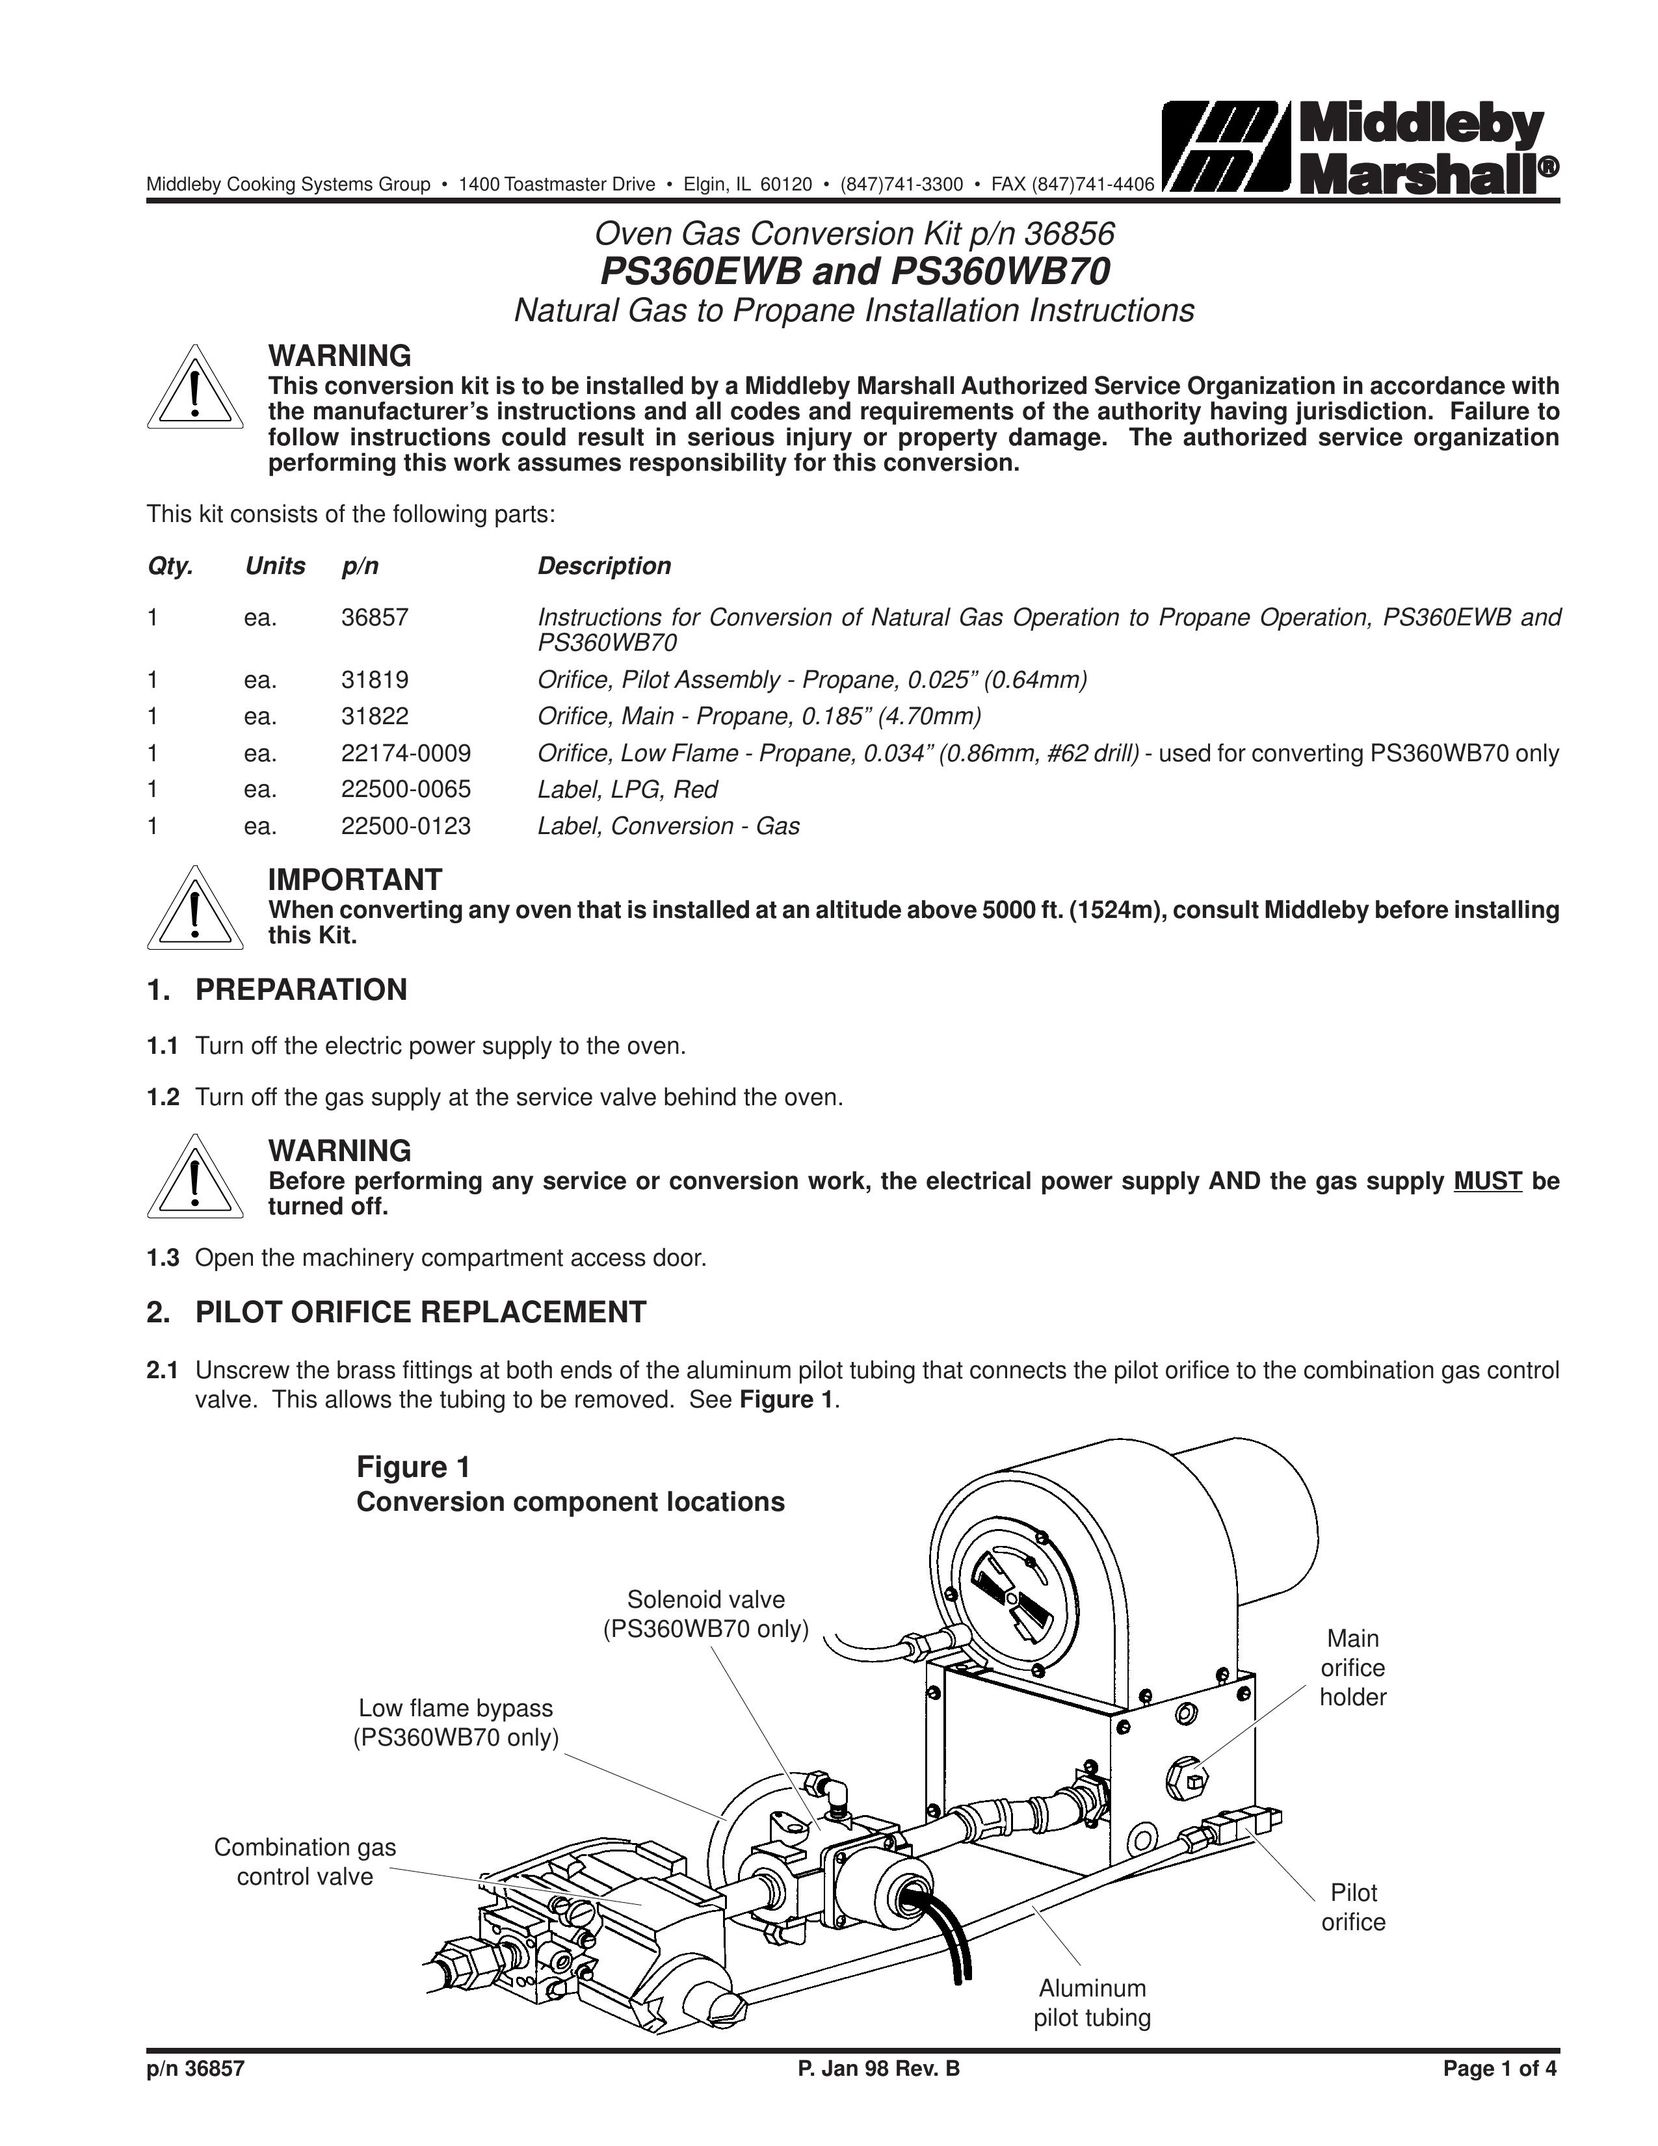 Middleby Marshall PS360WB70 Welding Consumables User Manual